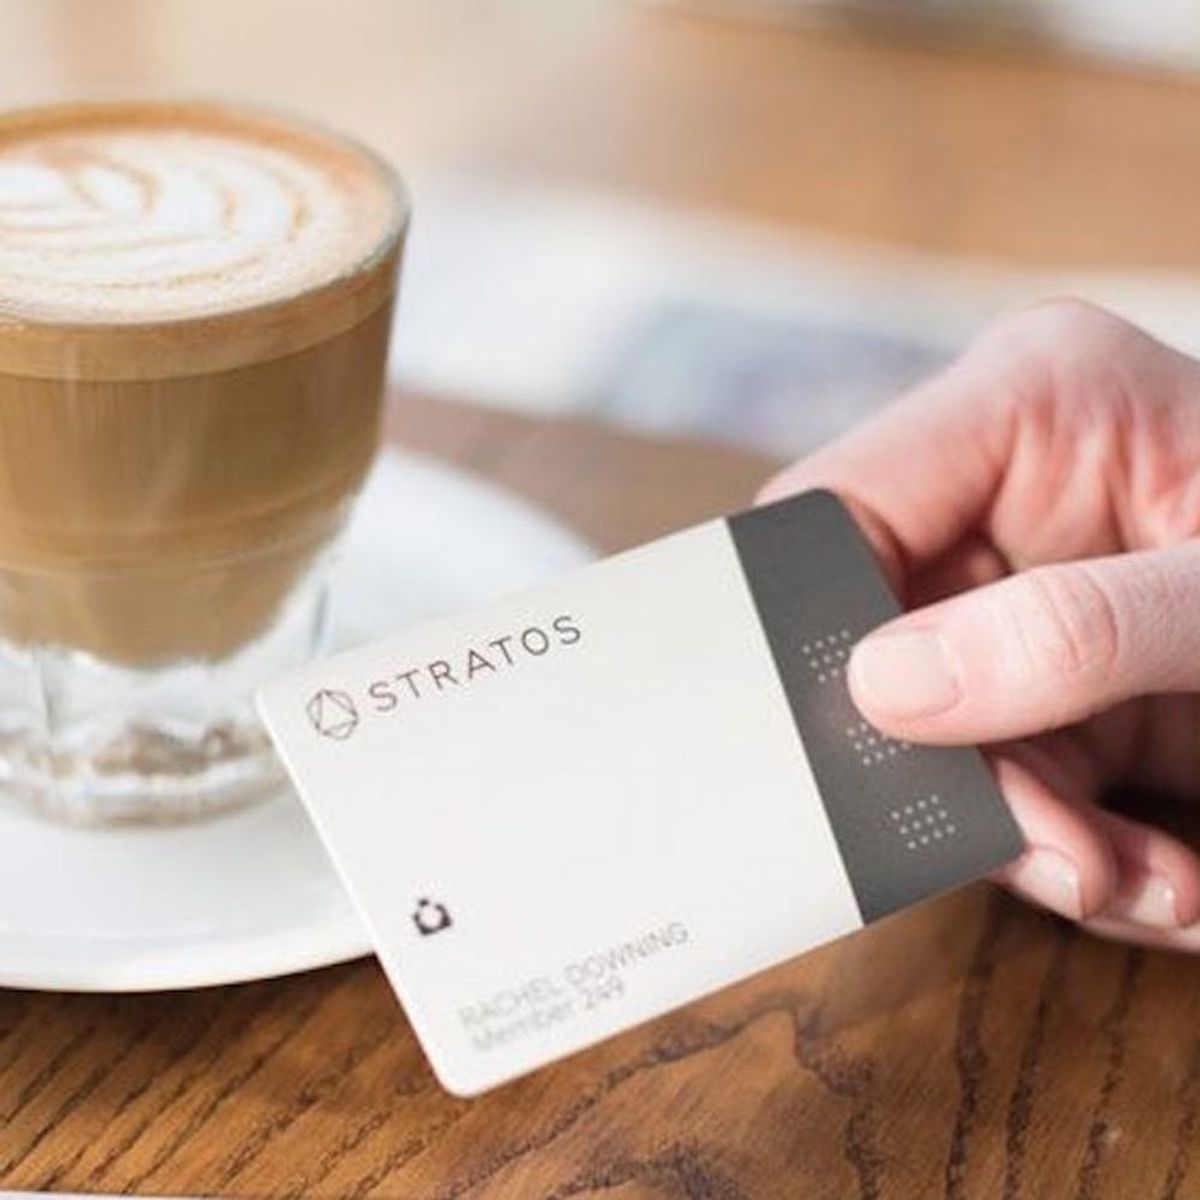 This High-Tech Card Will Make Your Purse a LOT Lighter